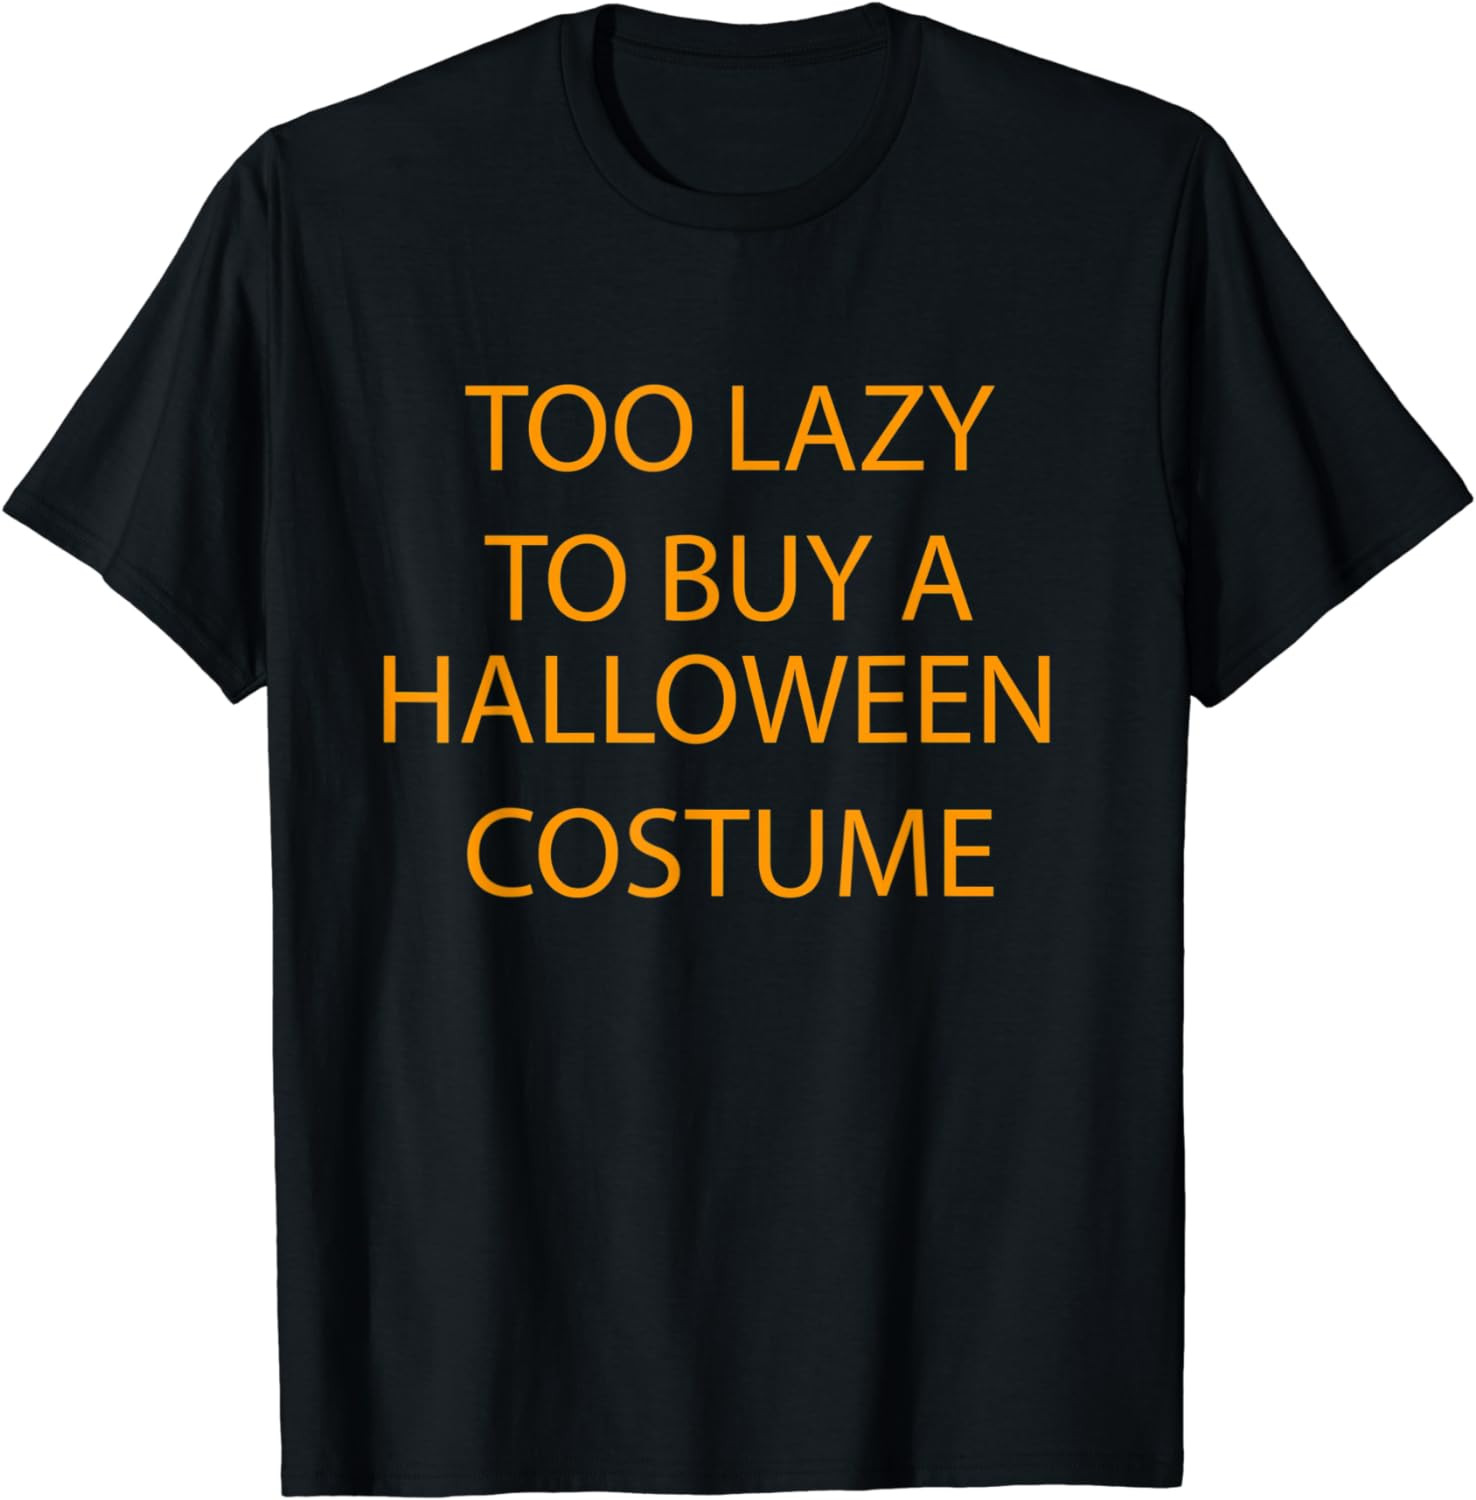 Too Lazy To Buy A Halloween Costume, Funny Phrase Outfit T-Shirt